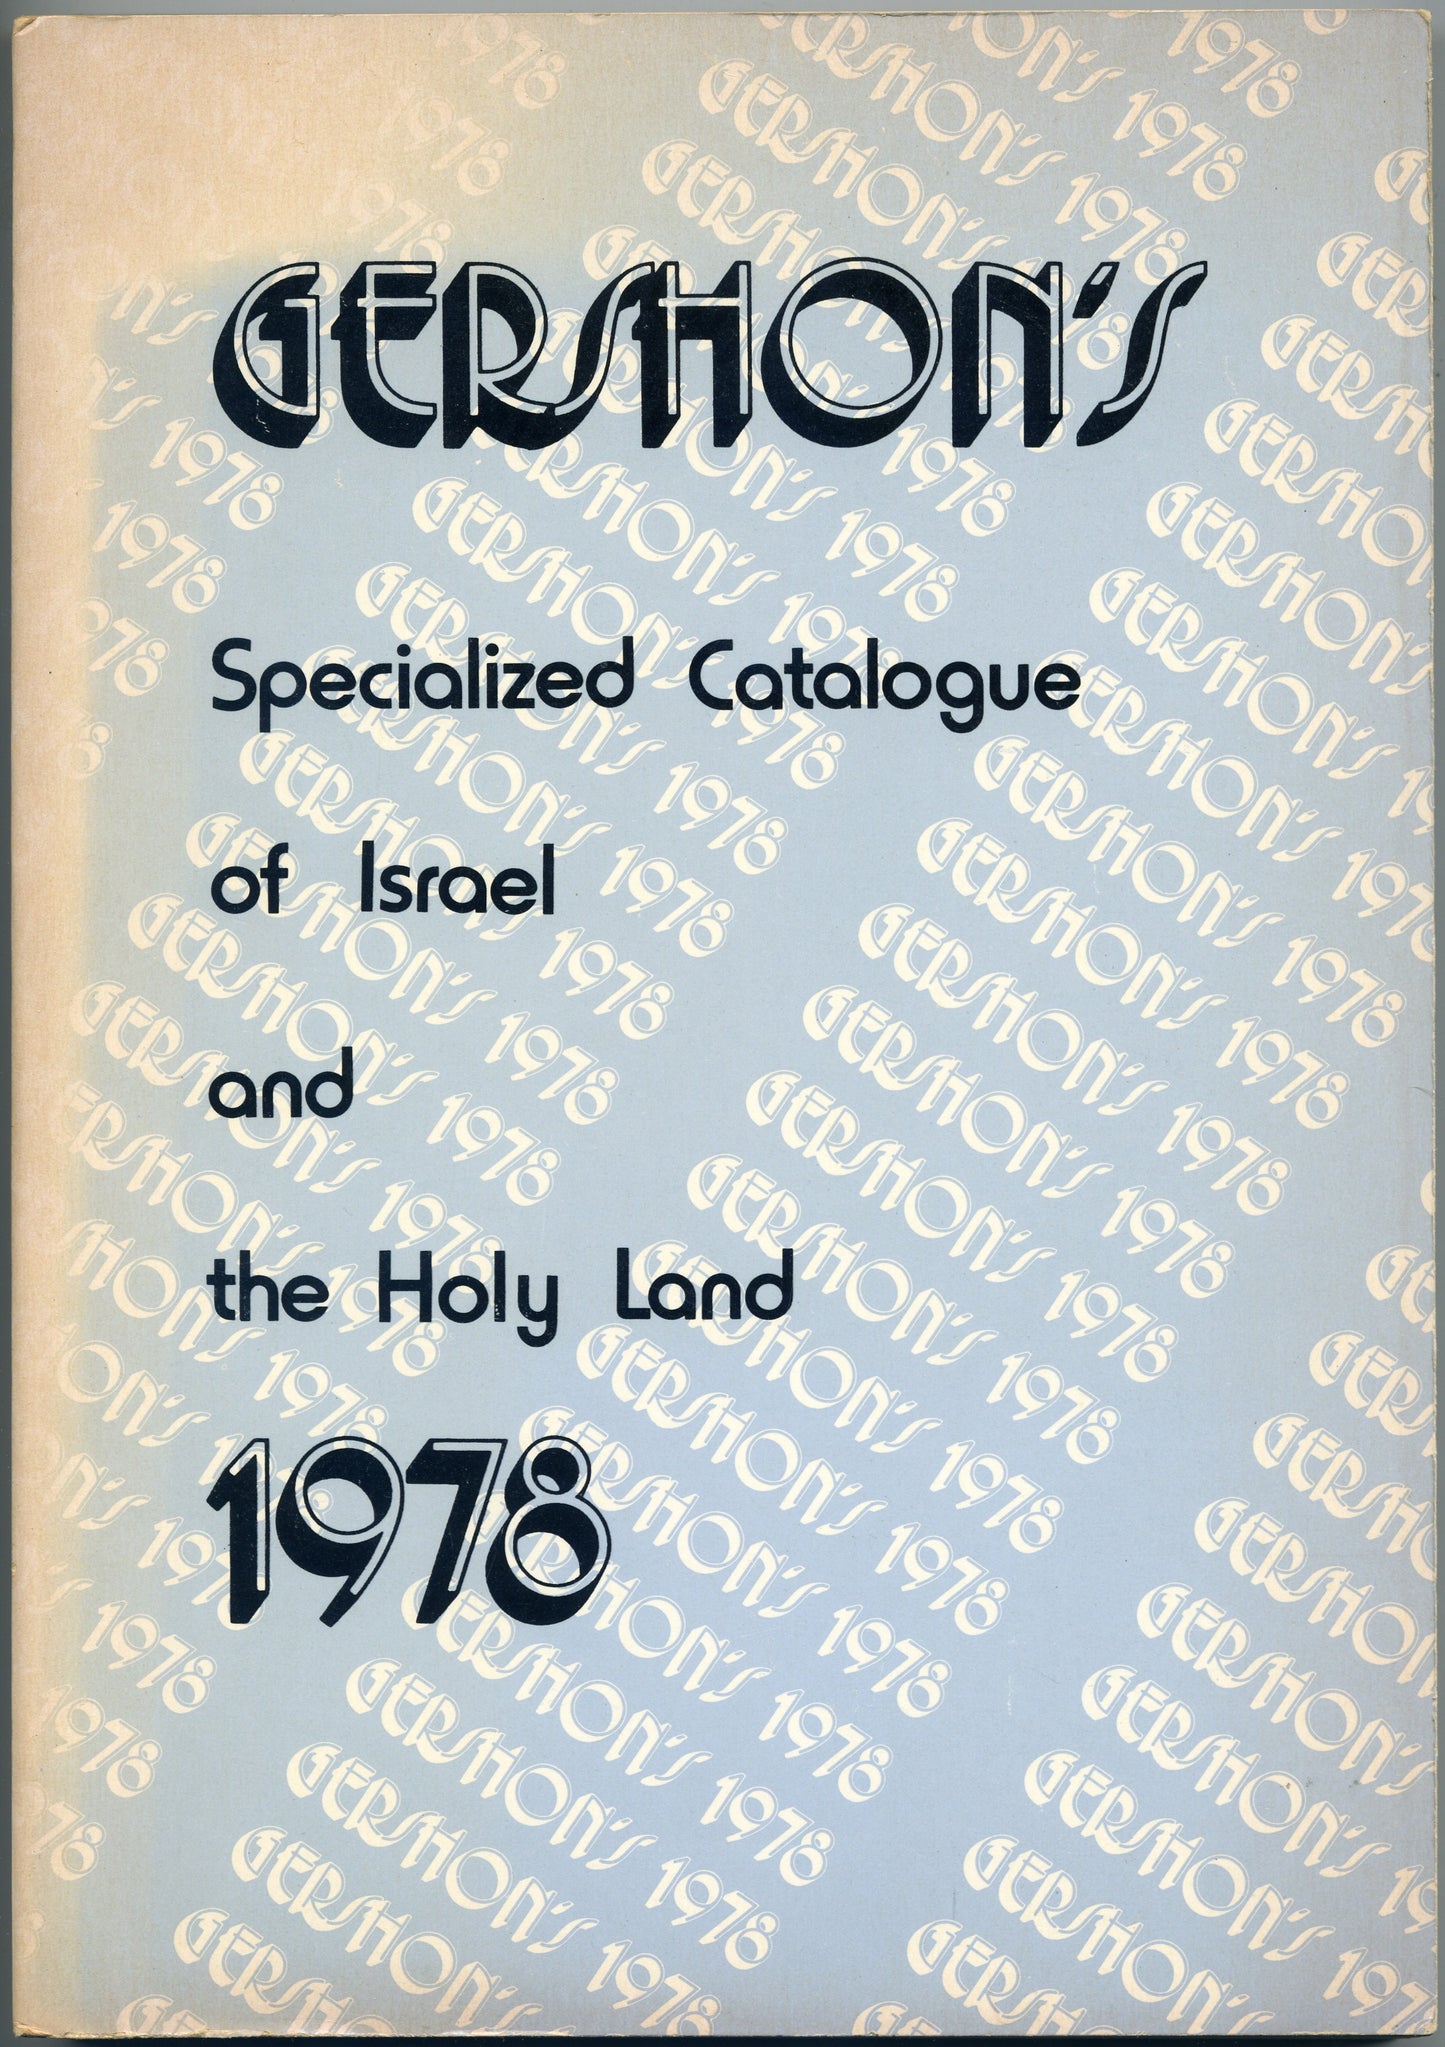 Gershon's specialized catalogue of Israel and the Holy Land cover